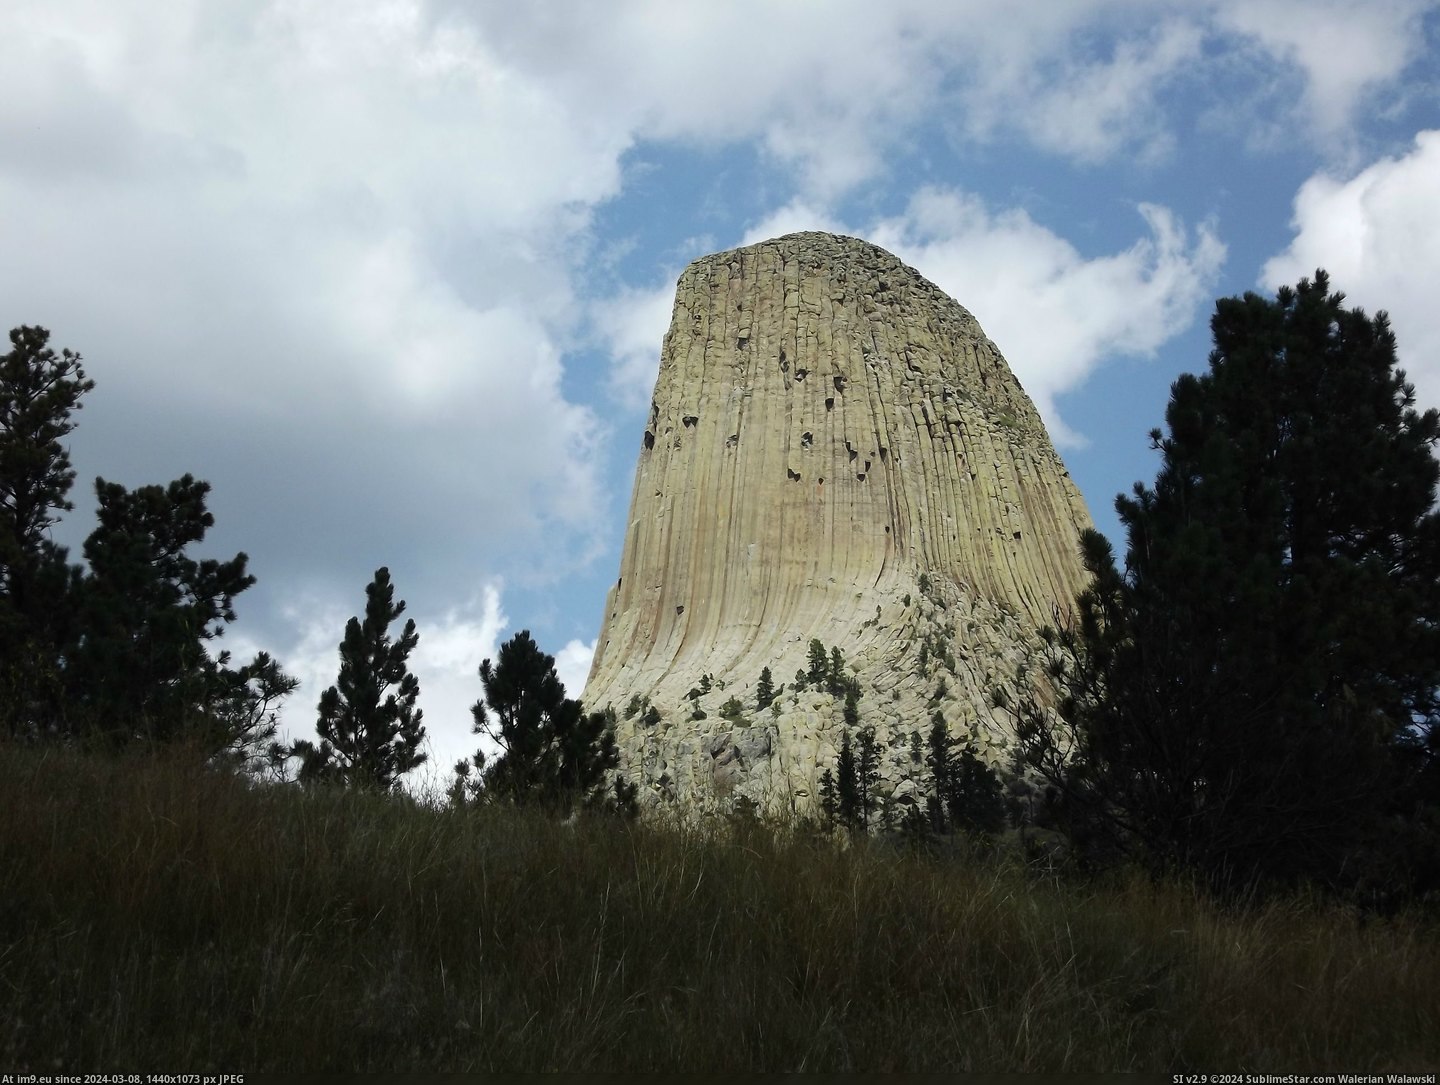 #Tower #Devil #Wyoming #Imposing #Mcginty #Impressive #Carroll #2572x1929 [Earthporn] The impressive and imposing Devil's Tower in Wyoming by C. McGinty-Carroll [2572x1929] Pic. (Image of album My r/EARTHPORN favs))